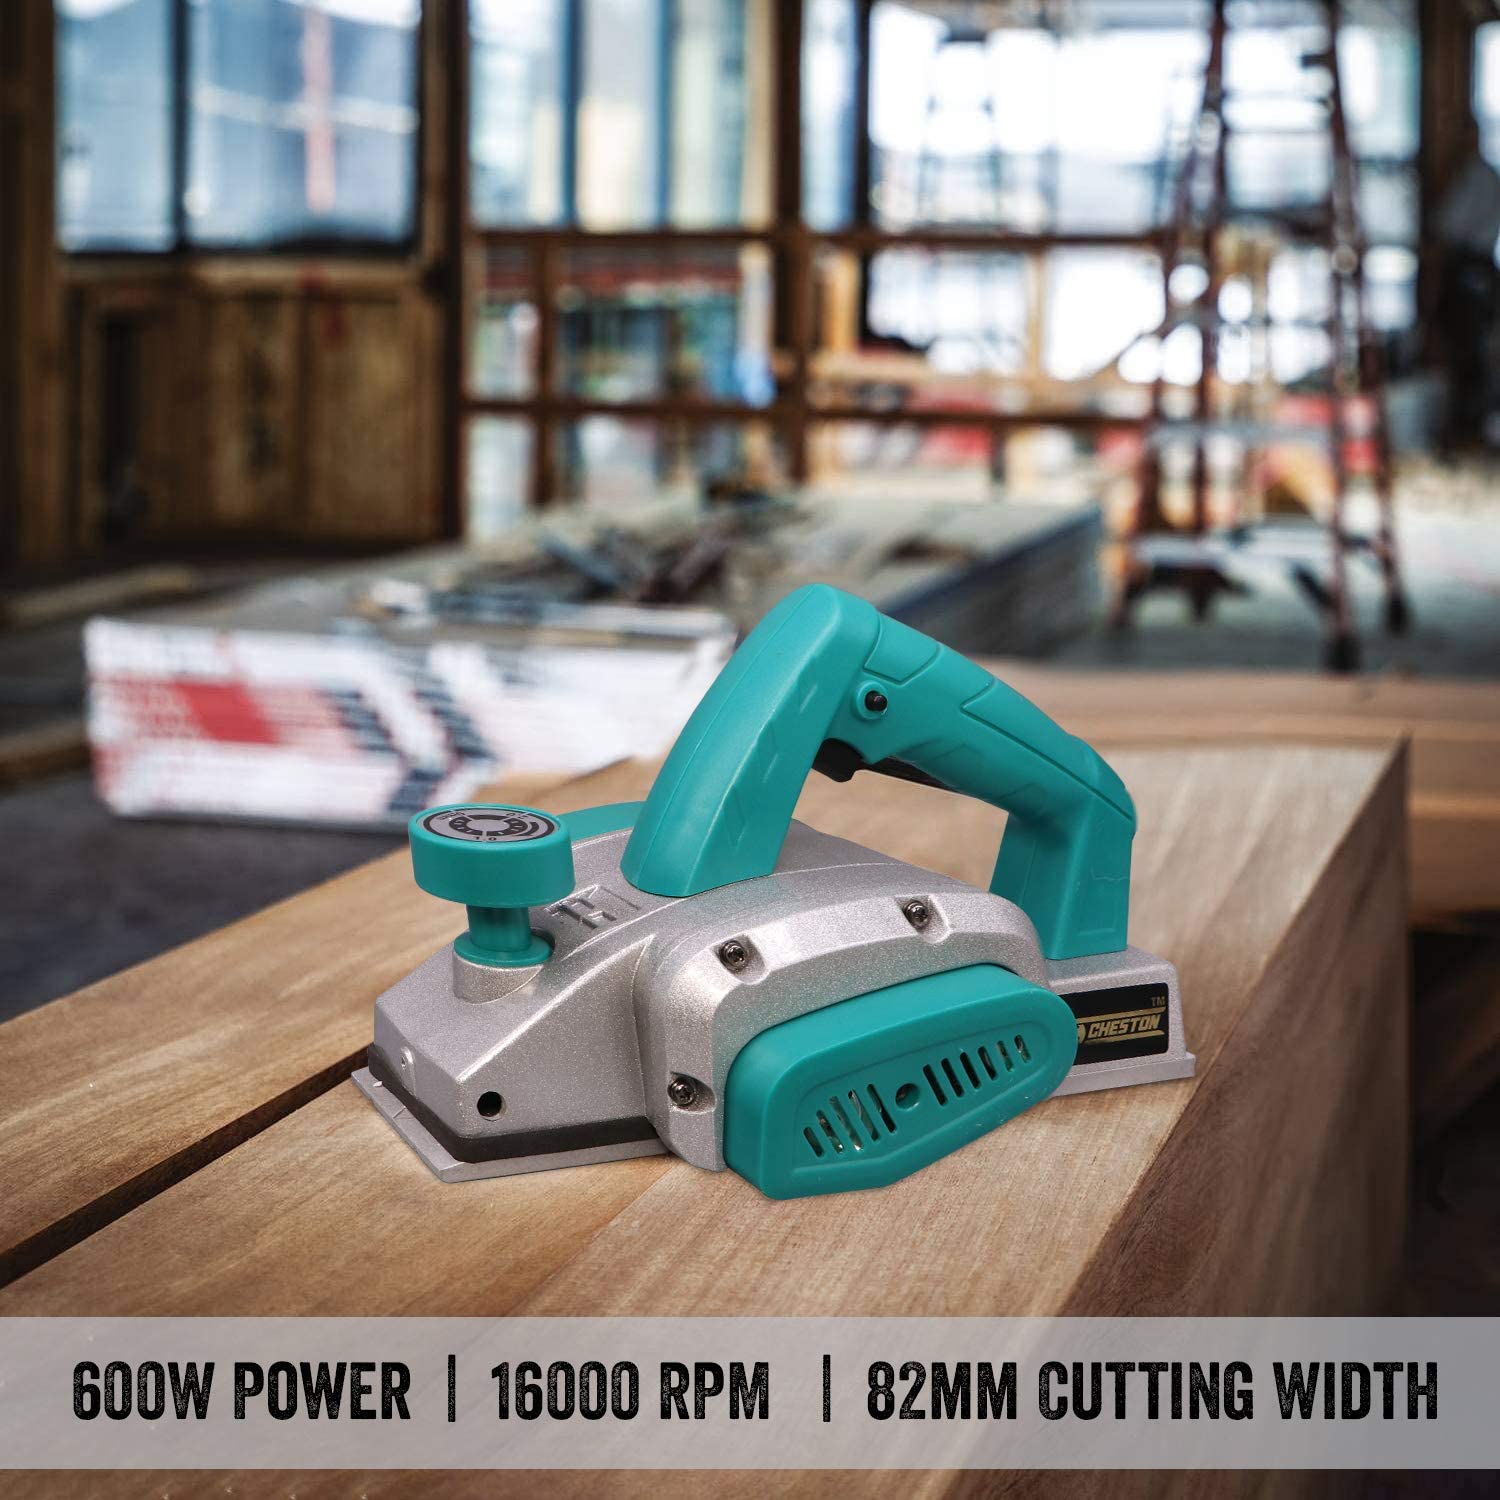 Cheston Electric Wood Planer 600W Inch Electric Hand-Held Planer, Industrial Electric Wood Planer + 850W Angle Grinder 4 Inch 100mm Power Tool Machine for cutting grinding